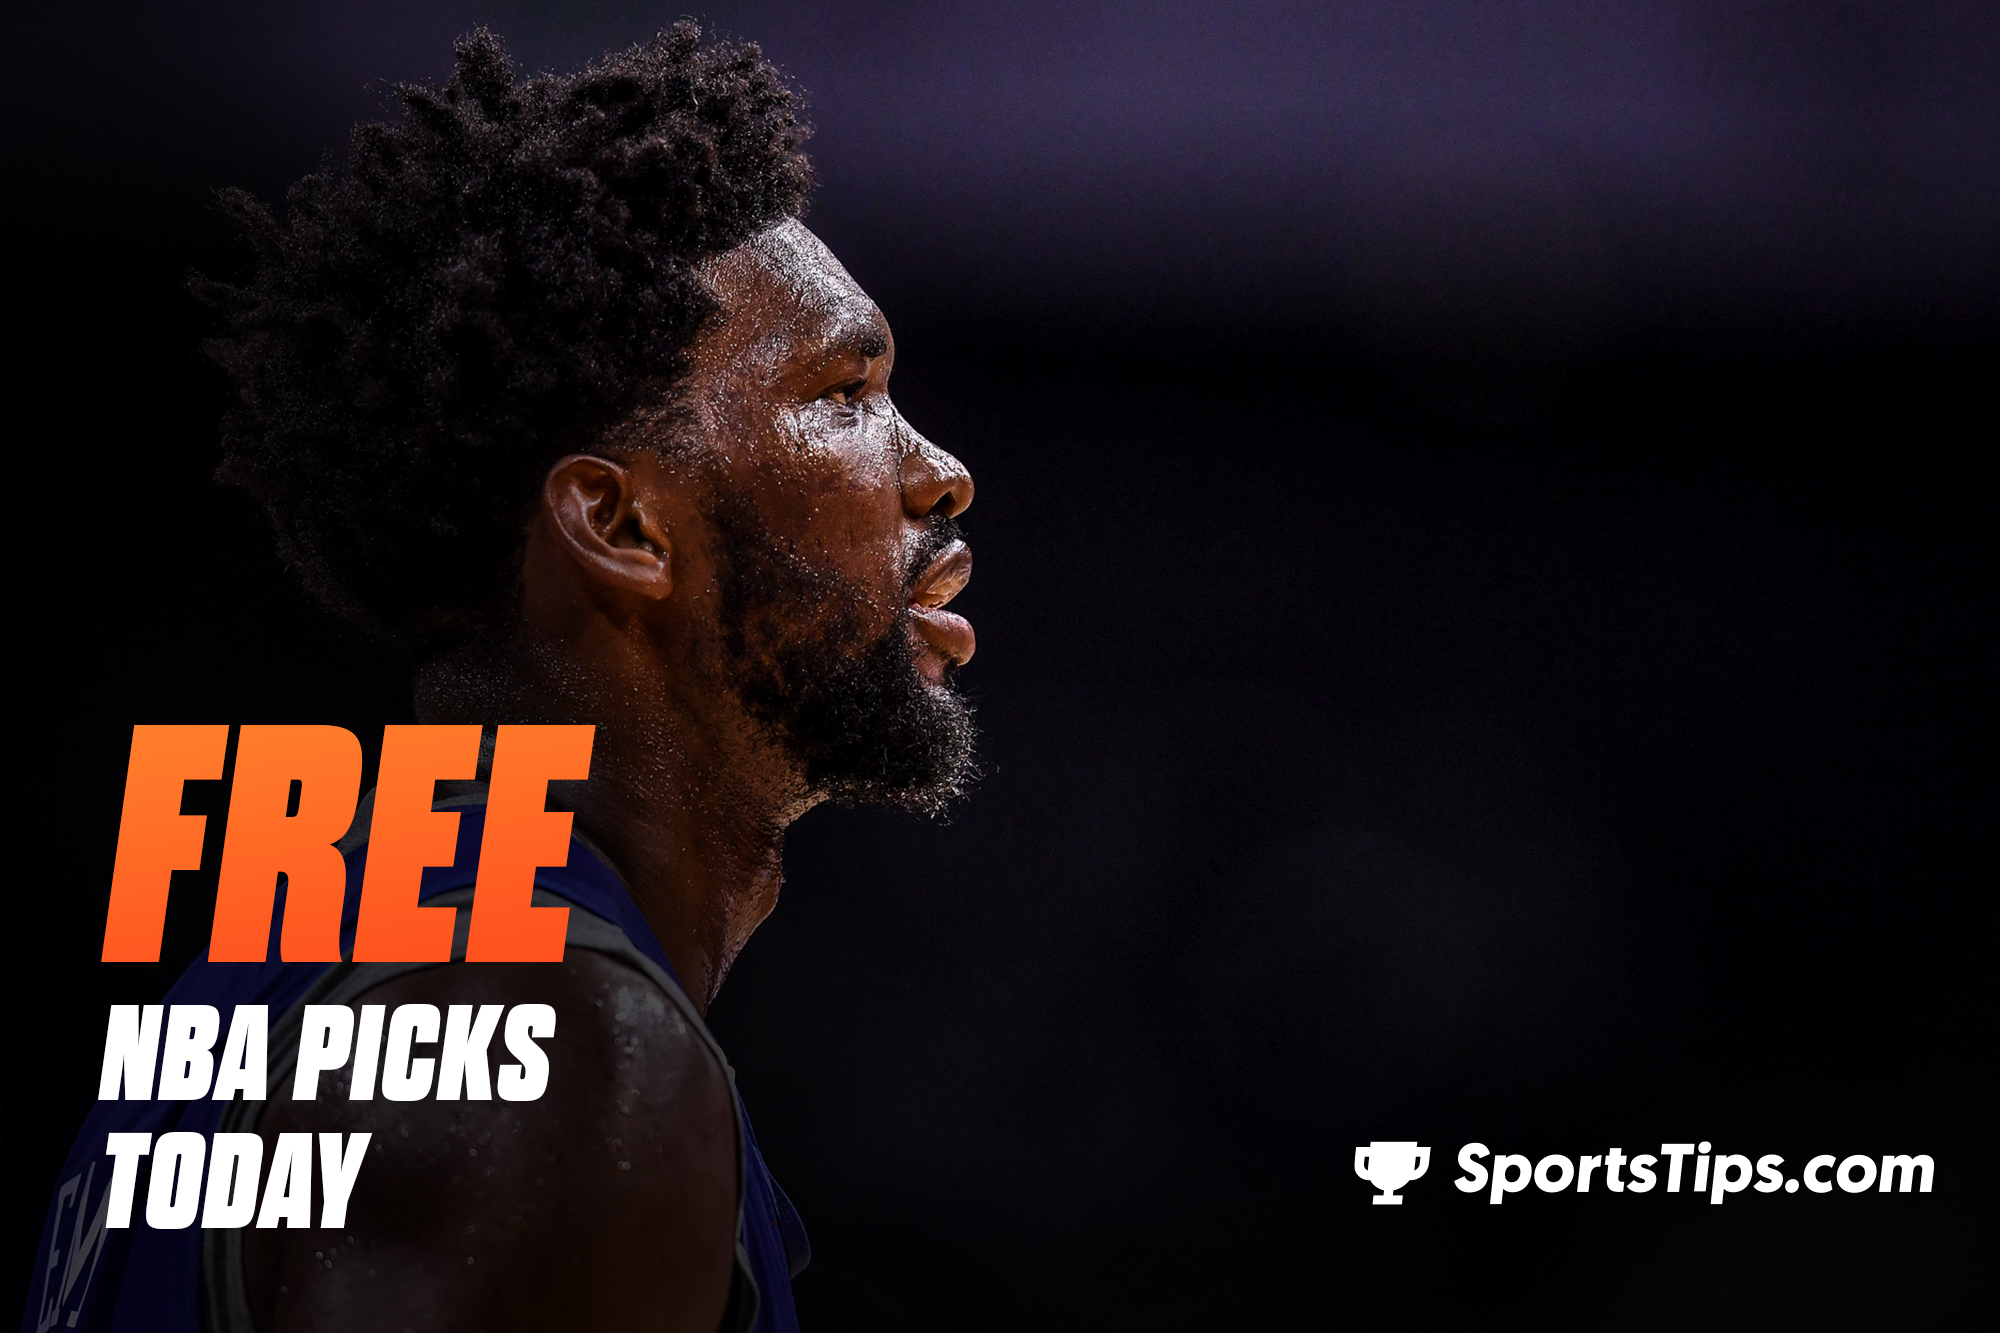 Free NBA Picks Today for Friday, December 3rd, 2021